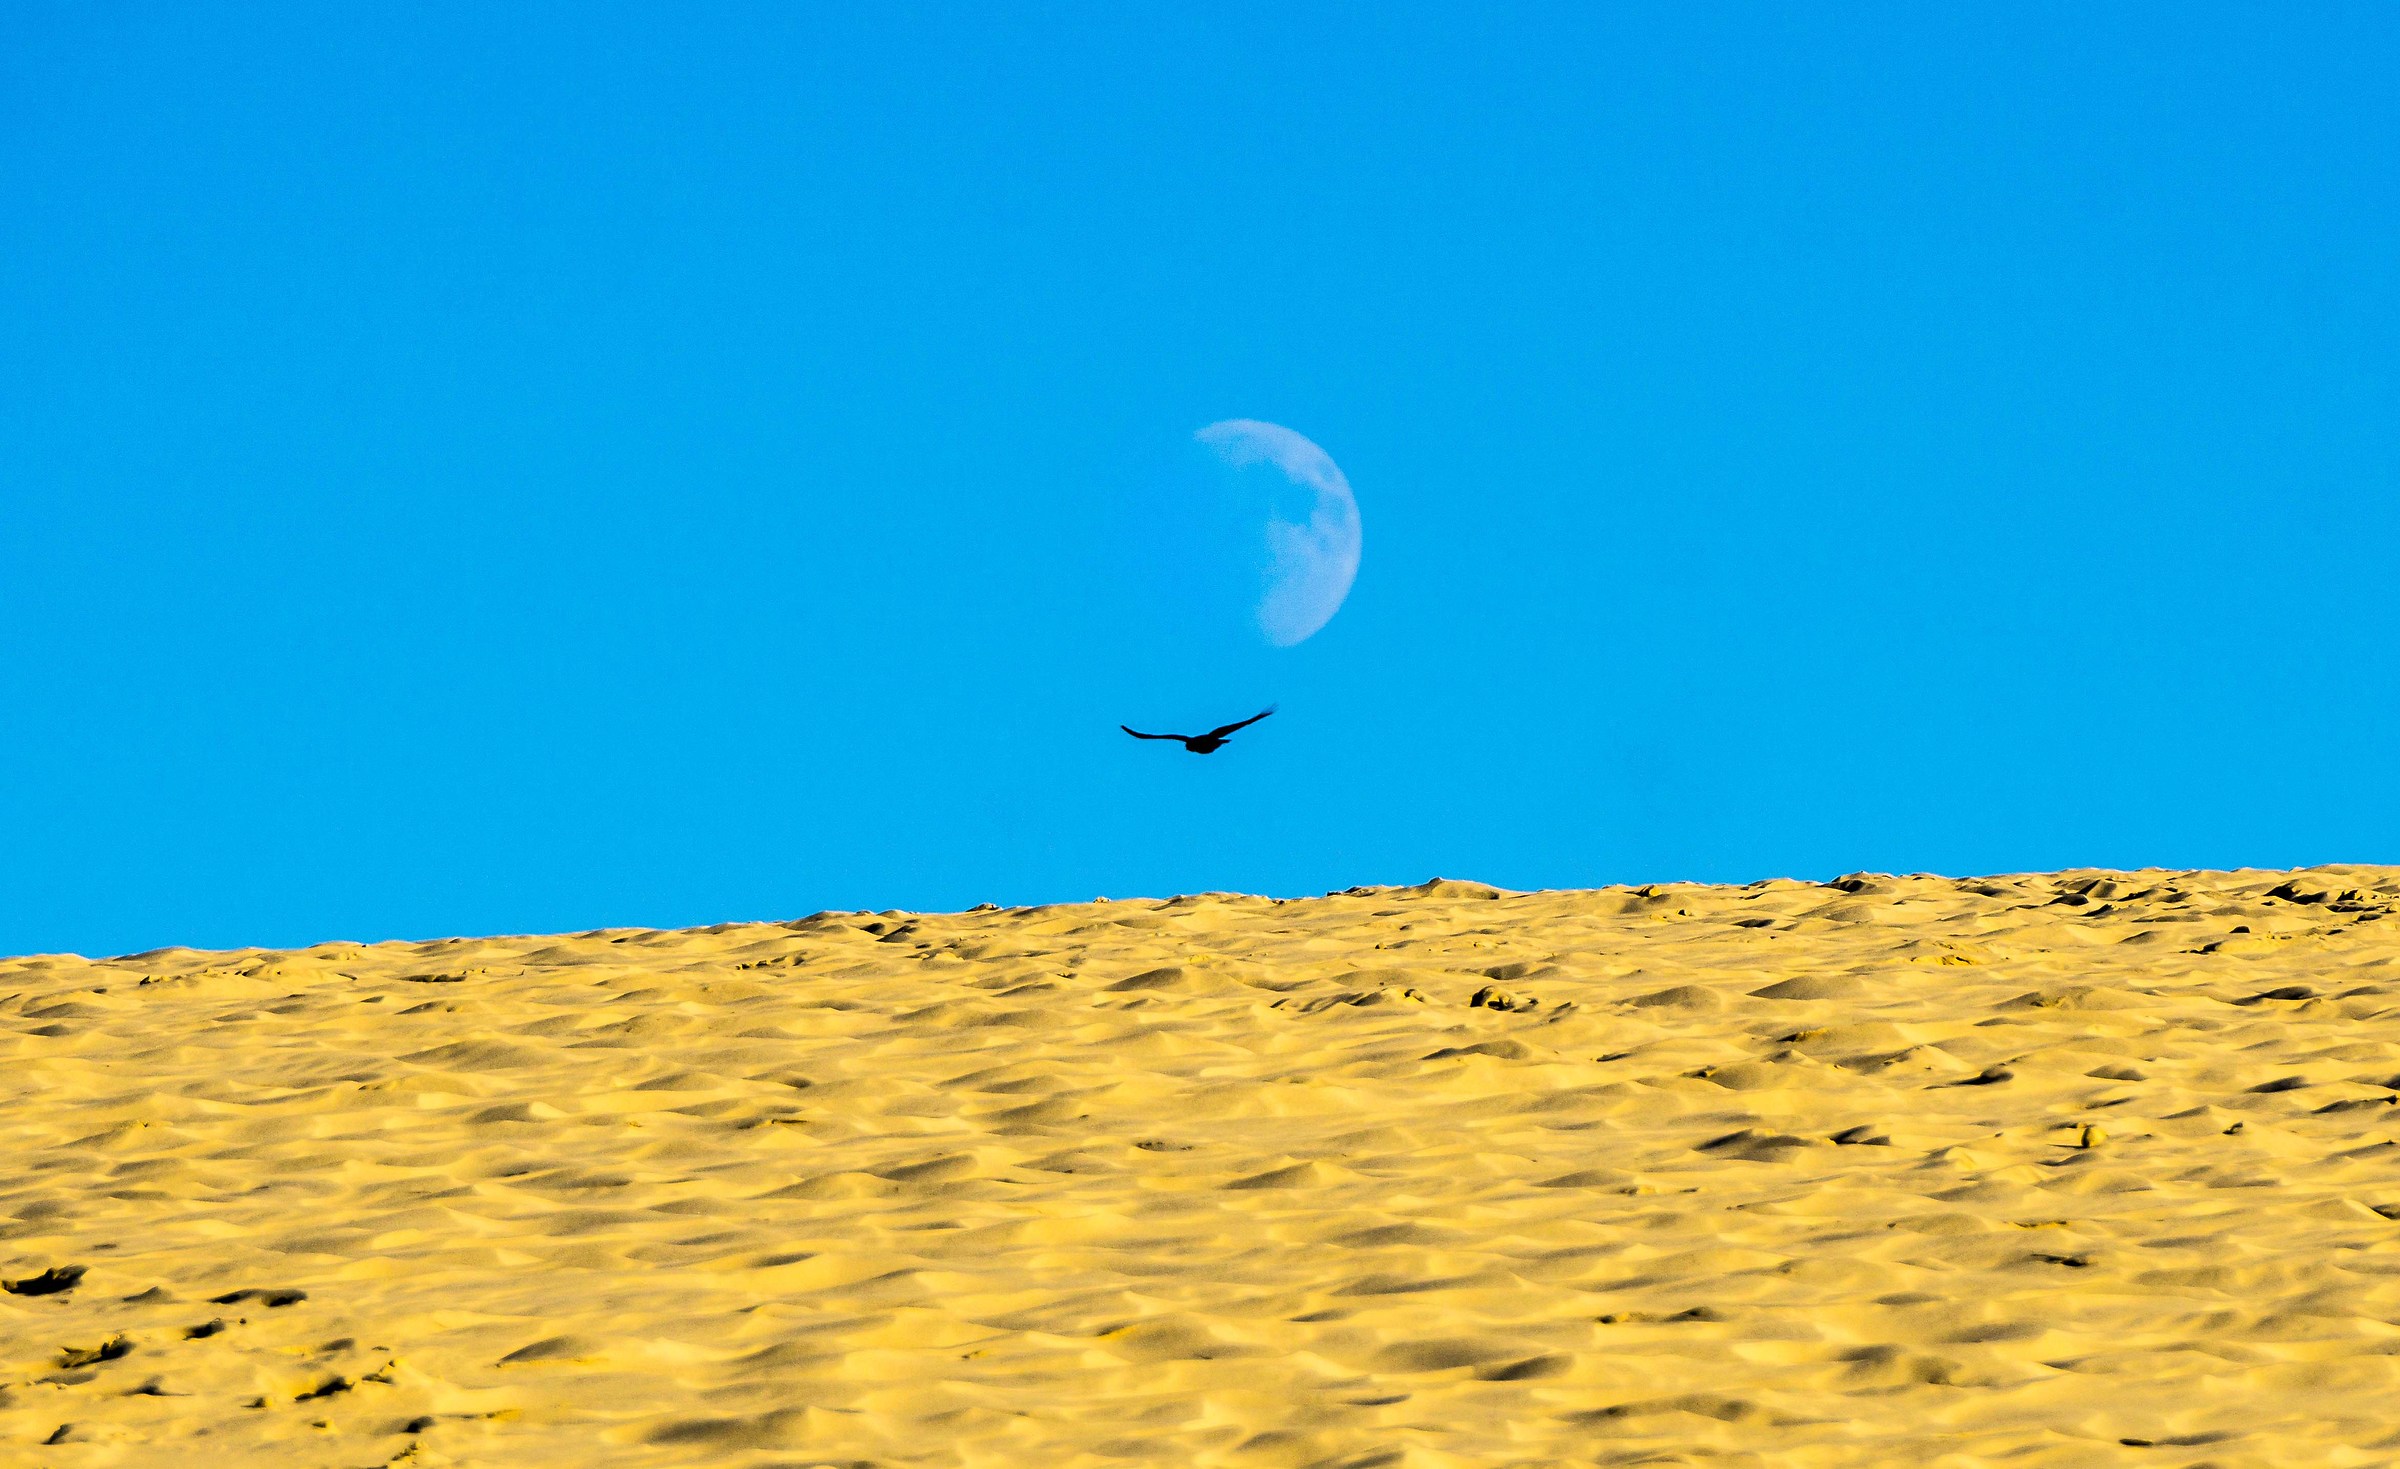 Between the Moon and The Dune .......